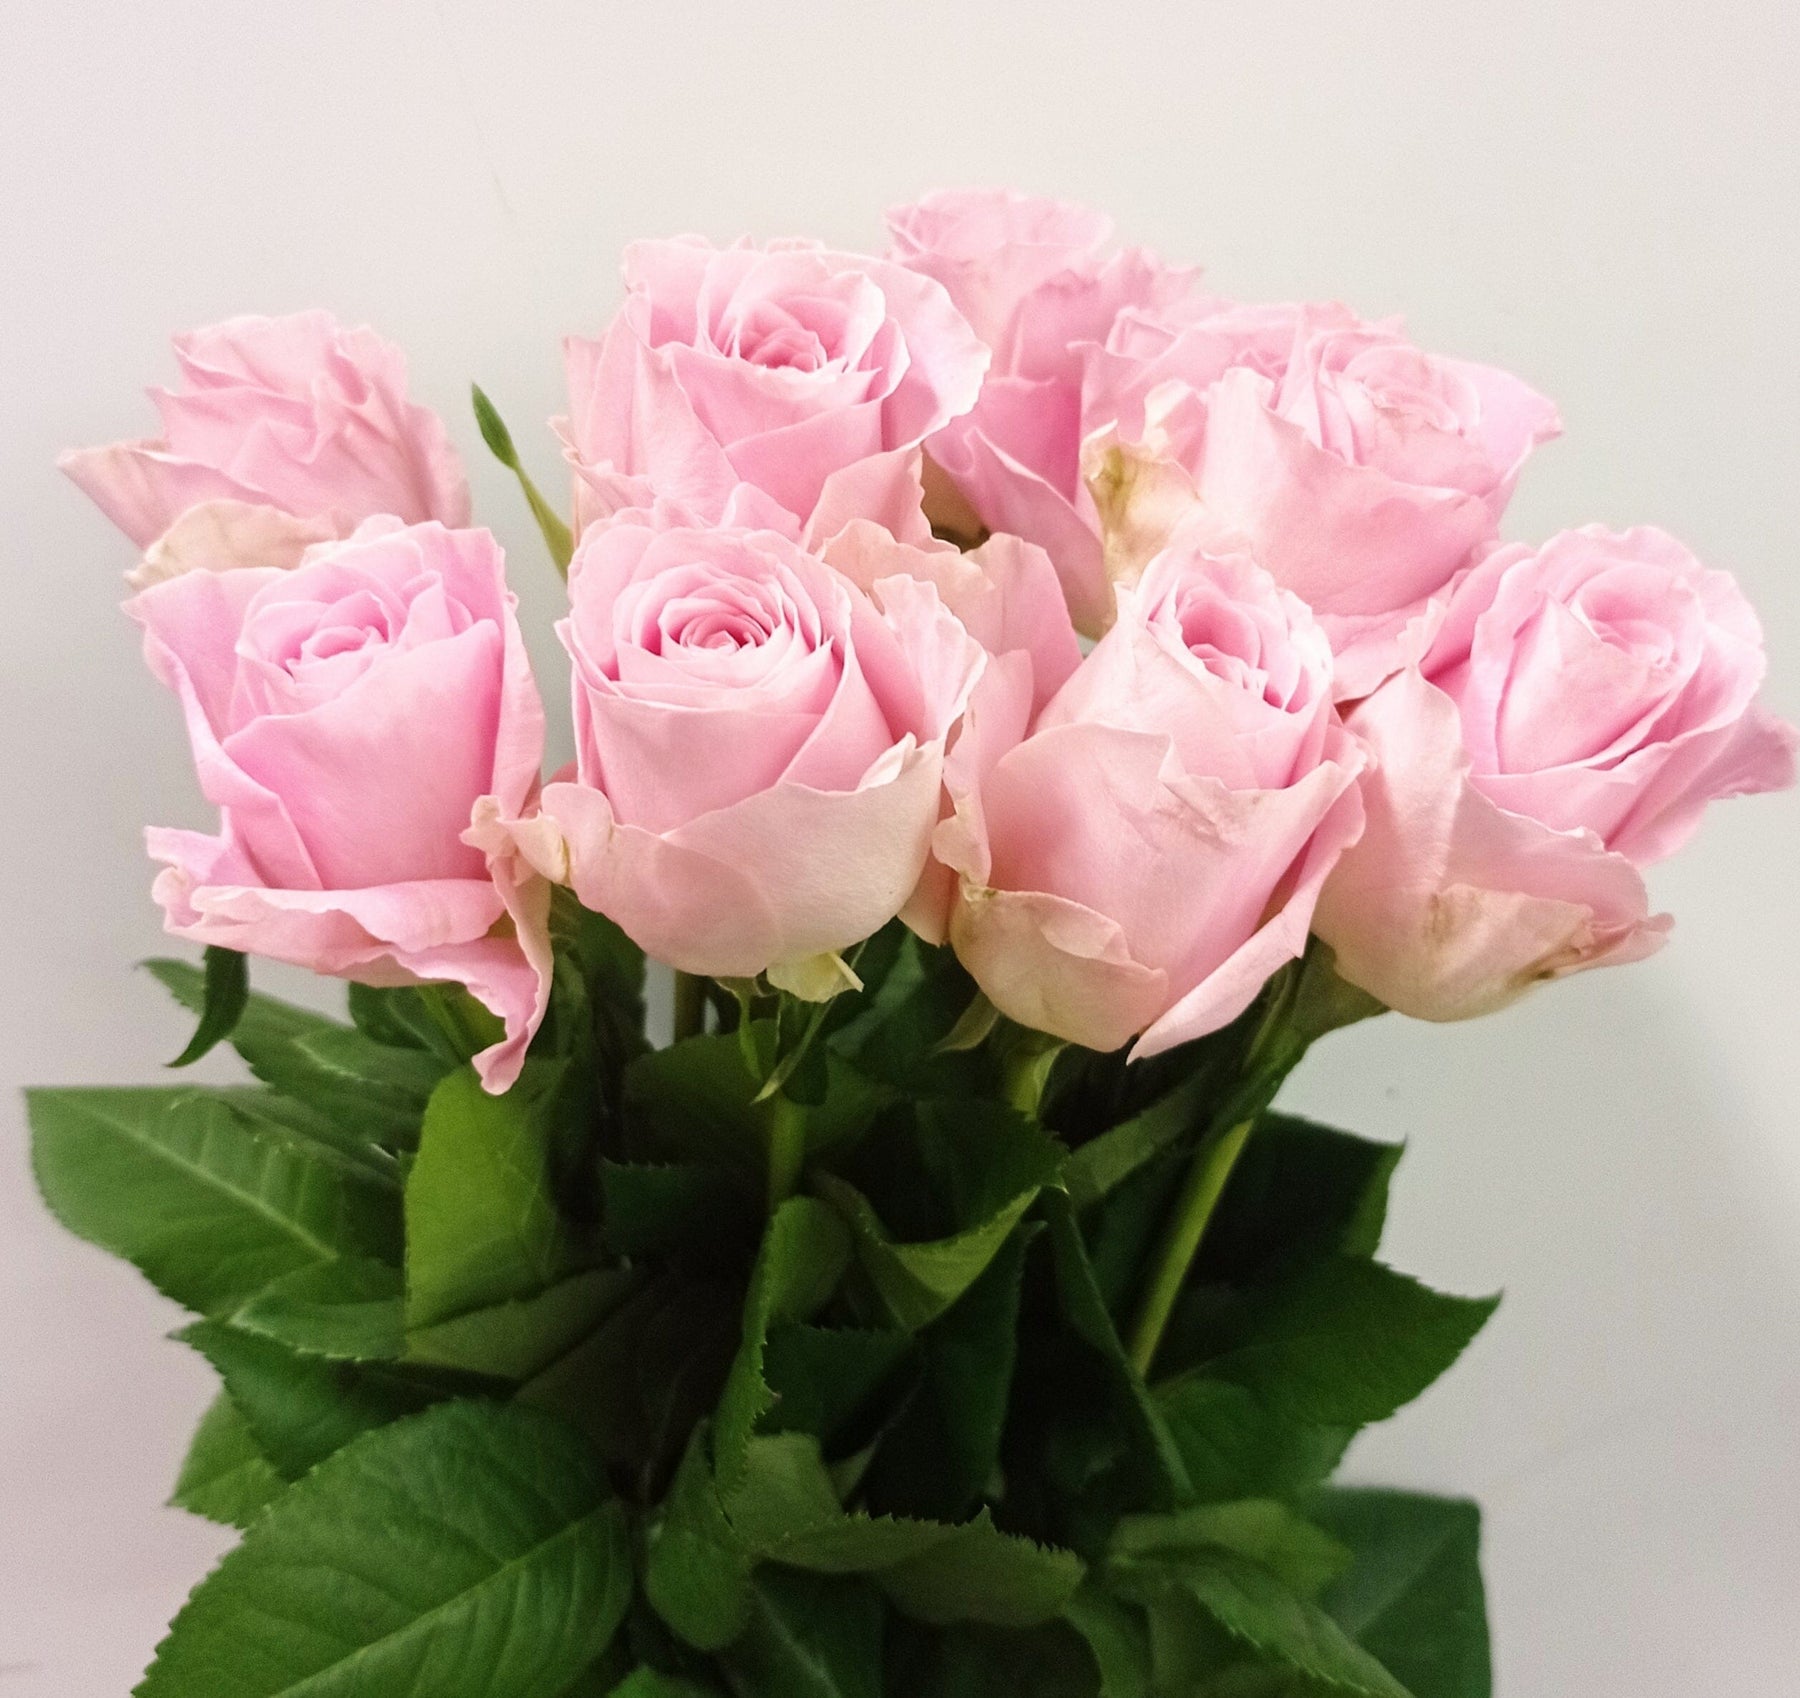 Rose 50cm (Imported) - Pink [20 Stems]